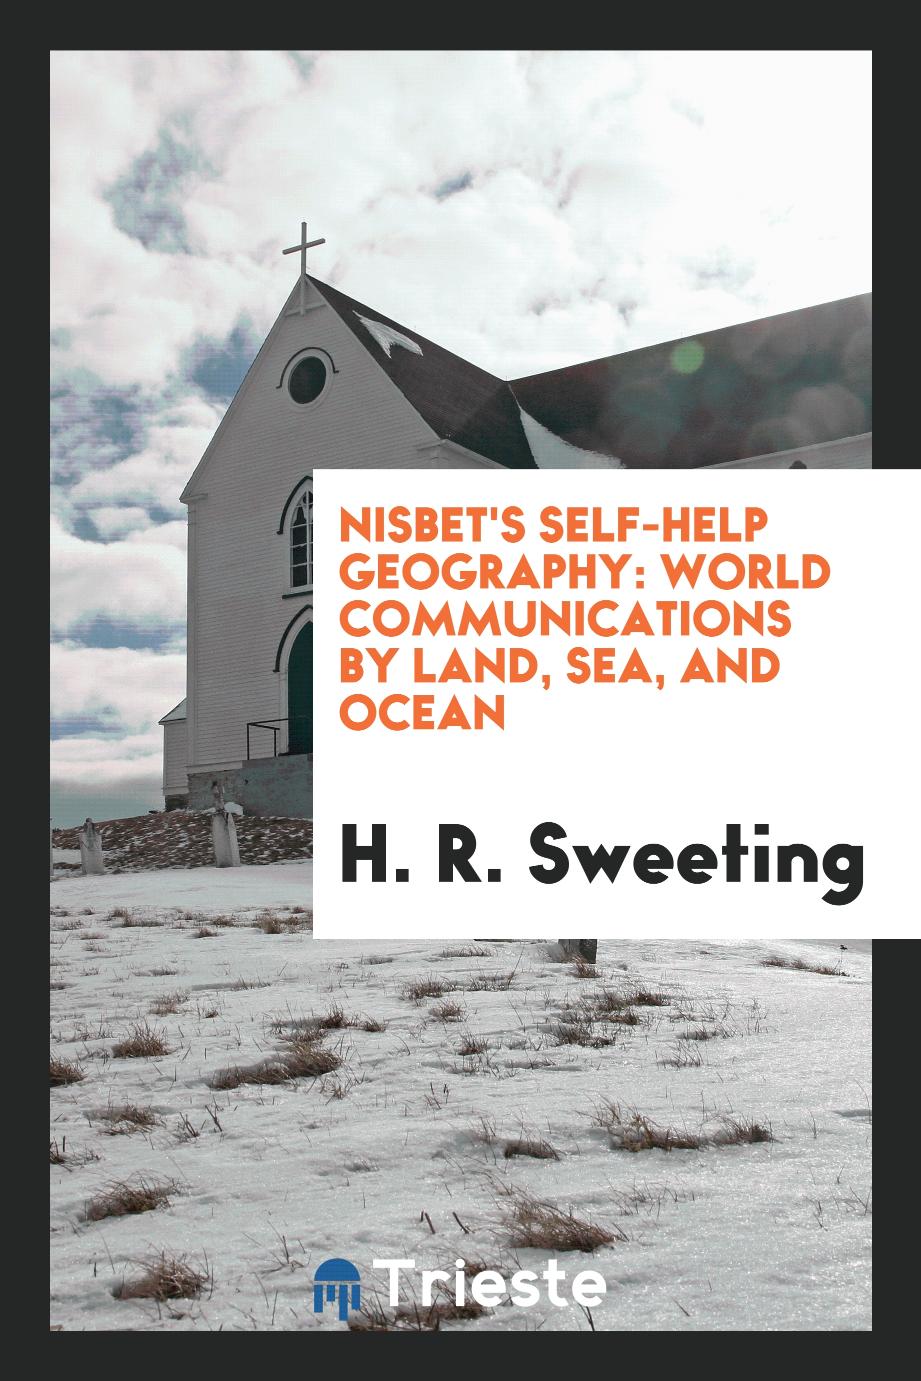 Nisbet's Self-help Geography: World Communications by Land, Sea, and Ocean